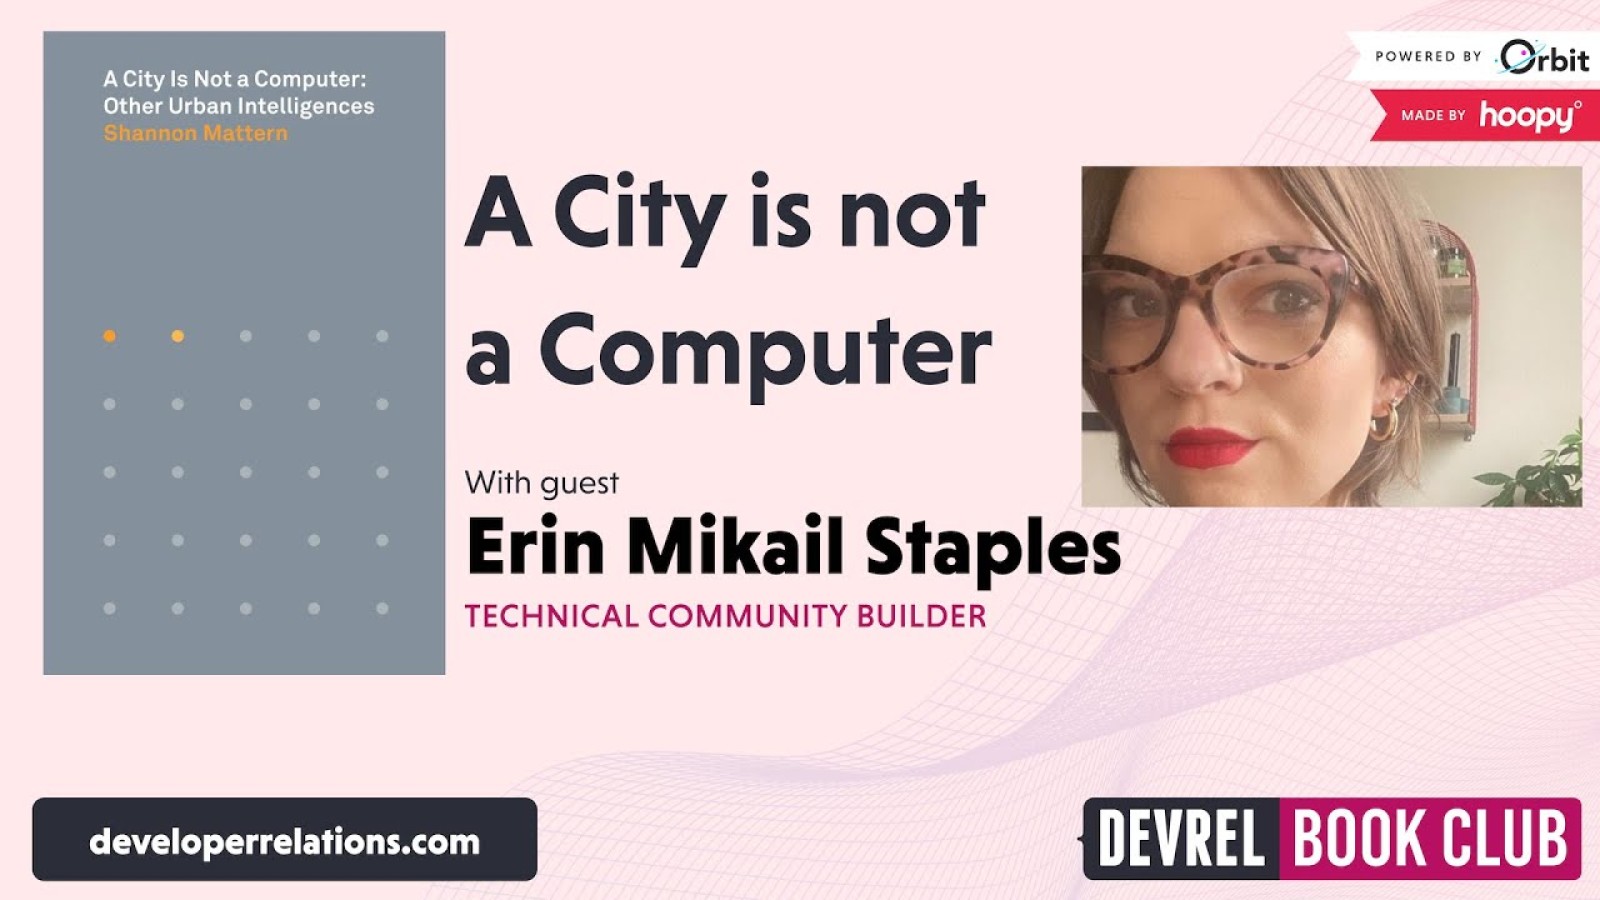 DevRel Book Club: A City is not a Computer with Erin Mikail Staples